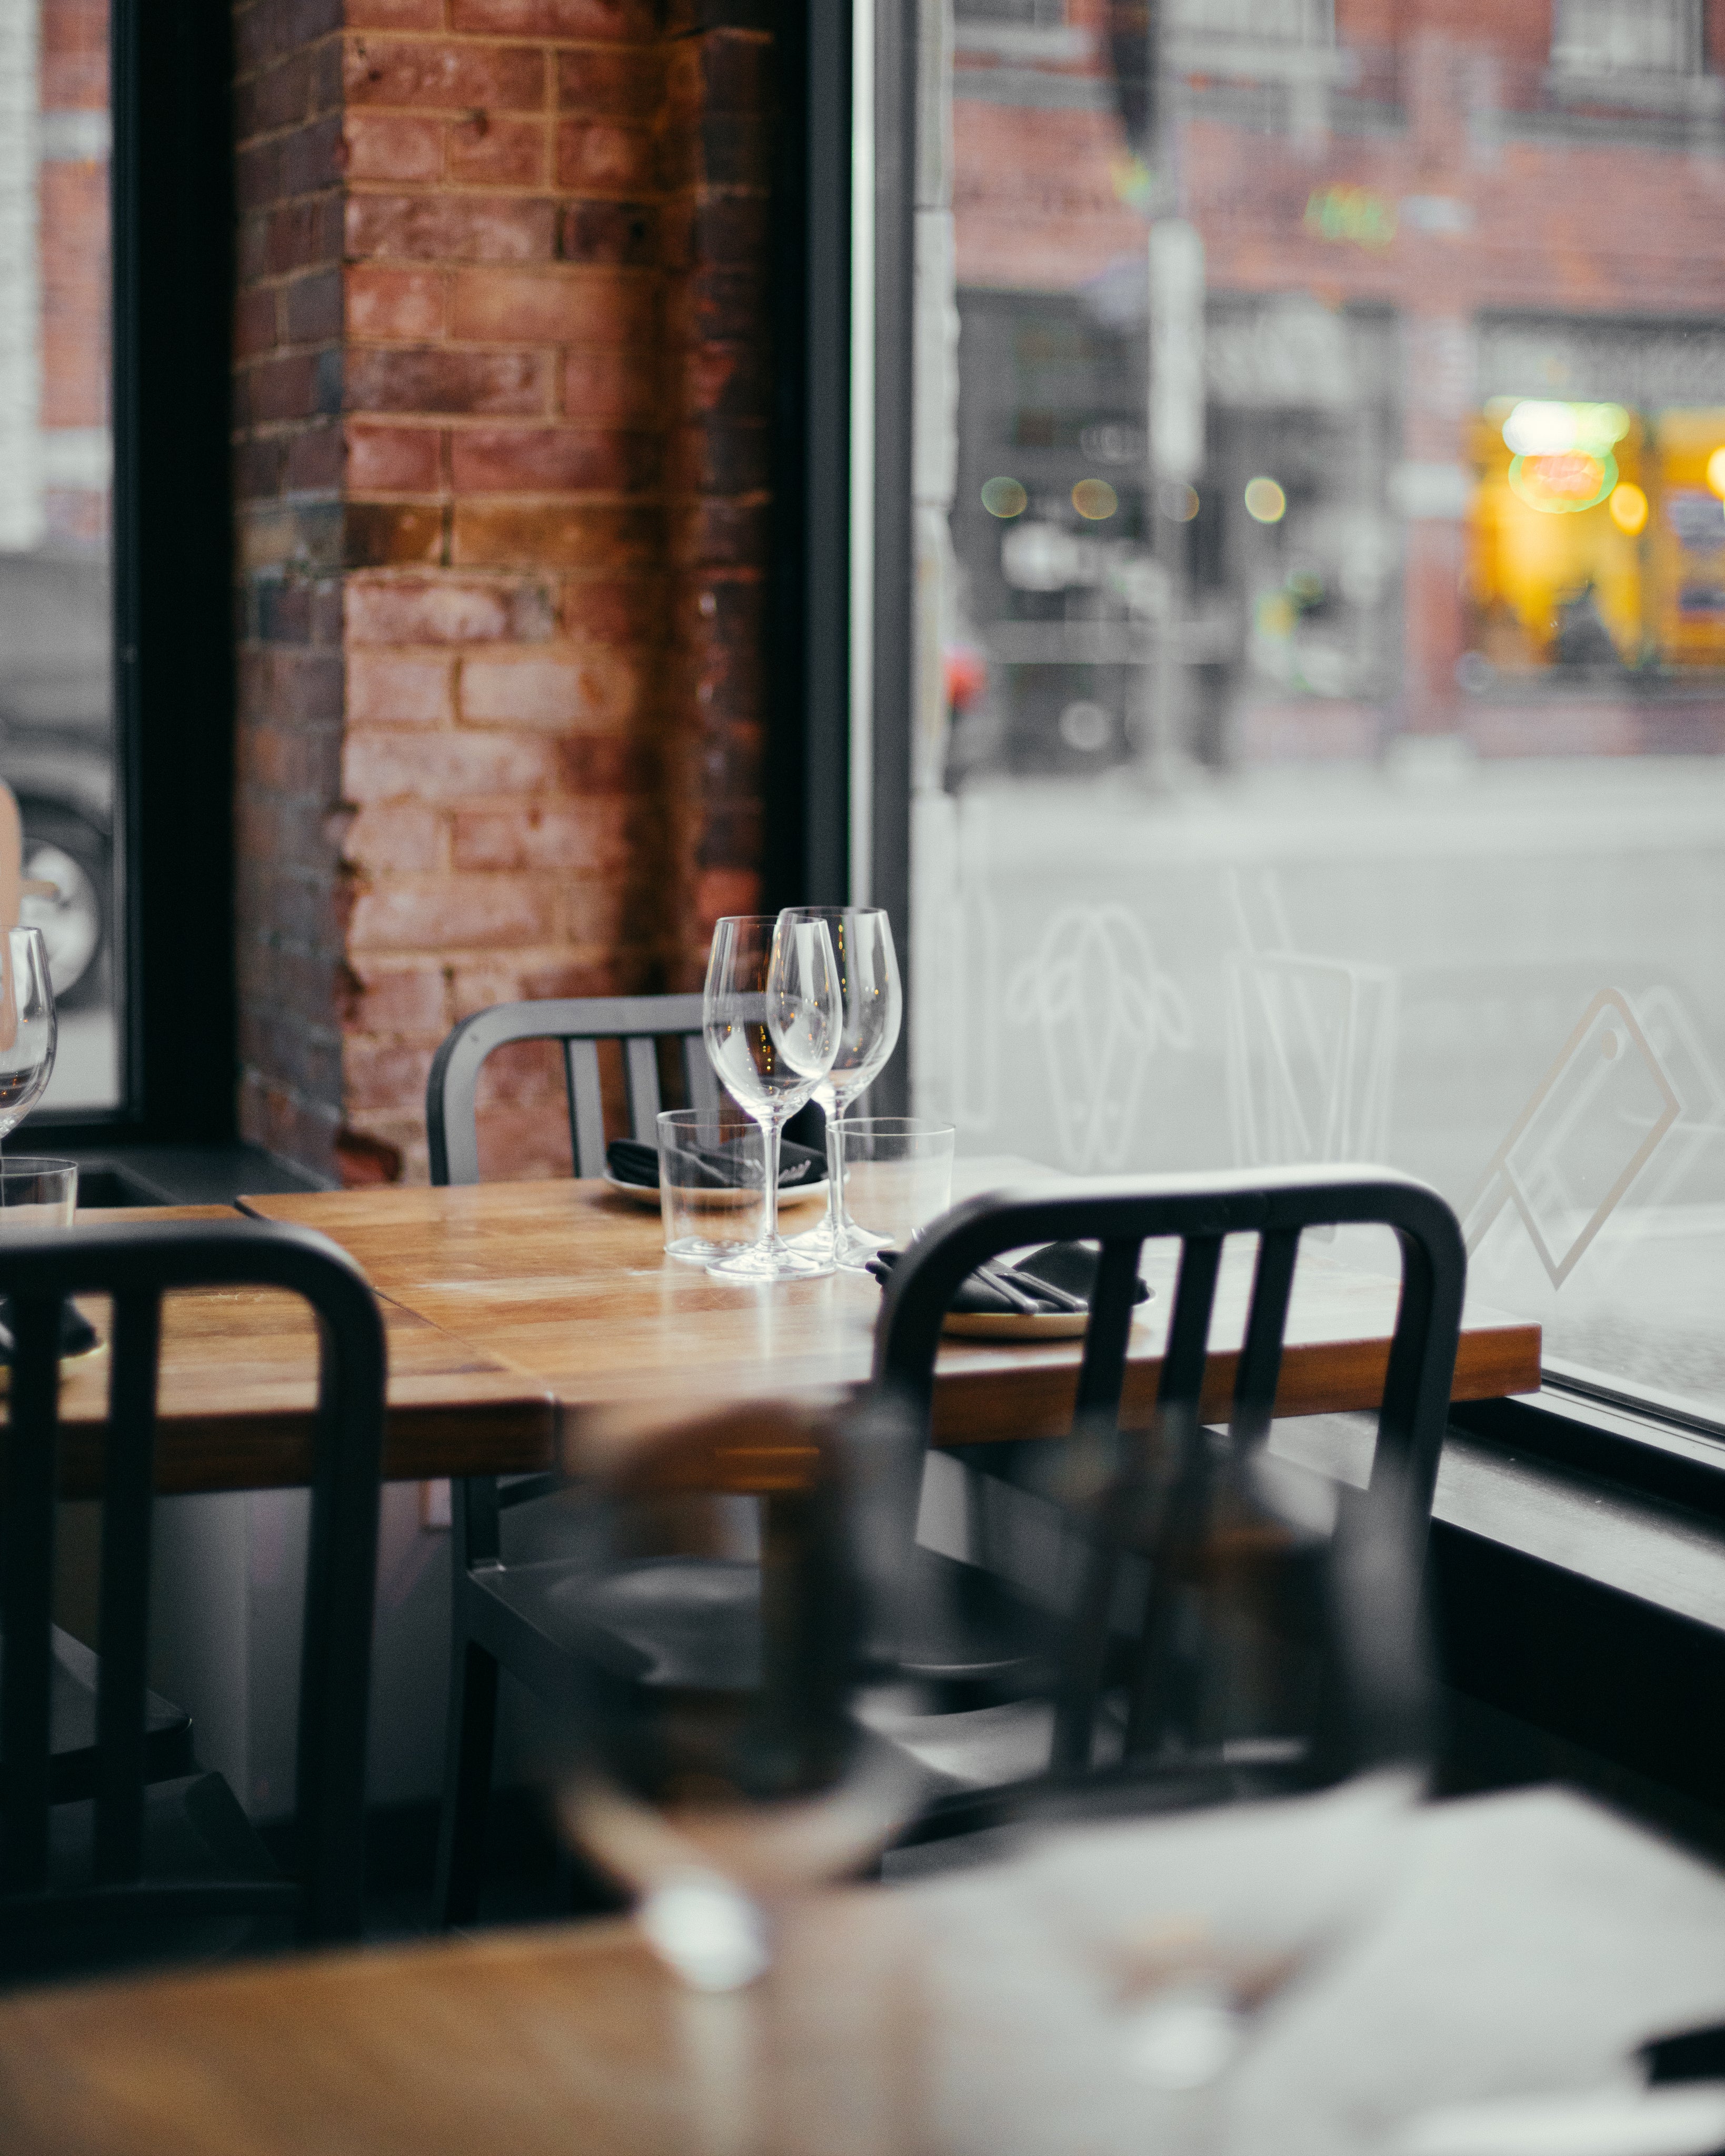 Hygienic Resources for Restaurants and Cafes